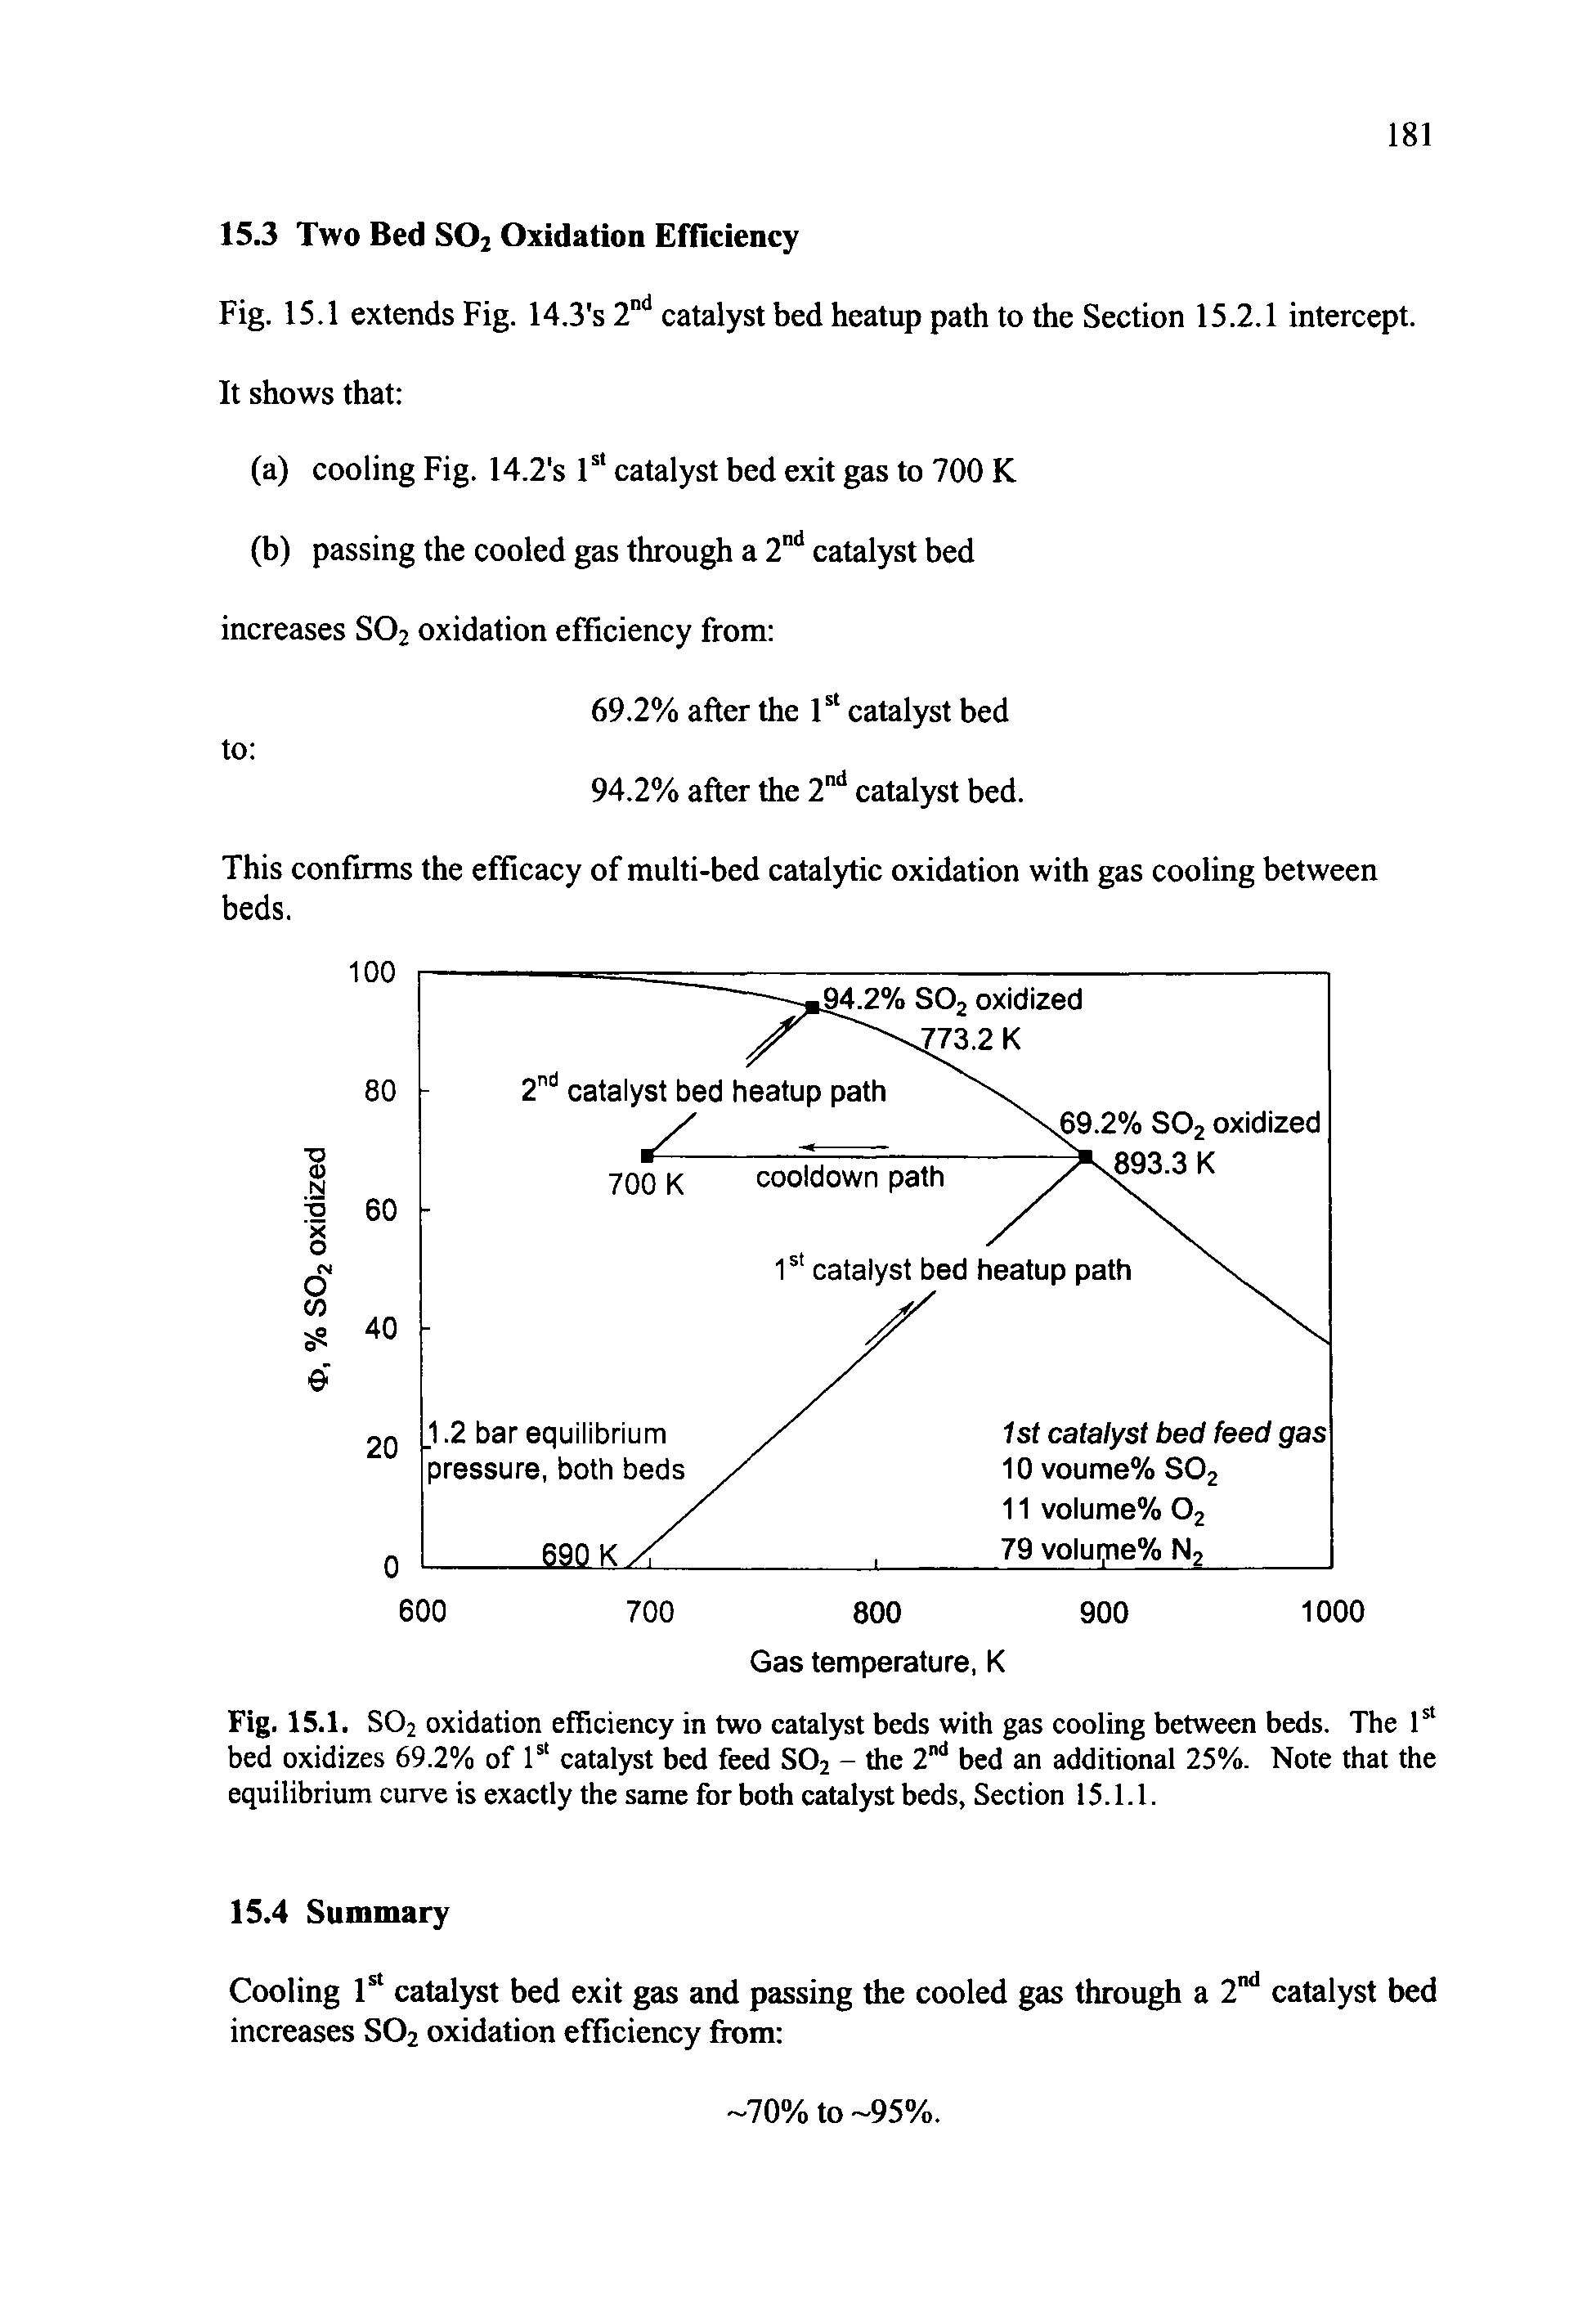 Fig. 15.1. S02 oxidation efficiency in two catalyst beds with gas cooling between beds. The 1st bed oxidizes 69.2% of 1st catalyst bed feed S02 - the 2nd bed an additional 25%. Note that the equilibrium curve is exactly the same for both catalyst beds, Section 15.1.1.